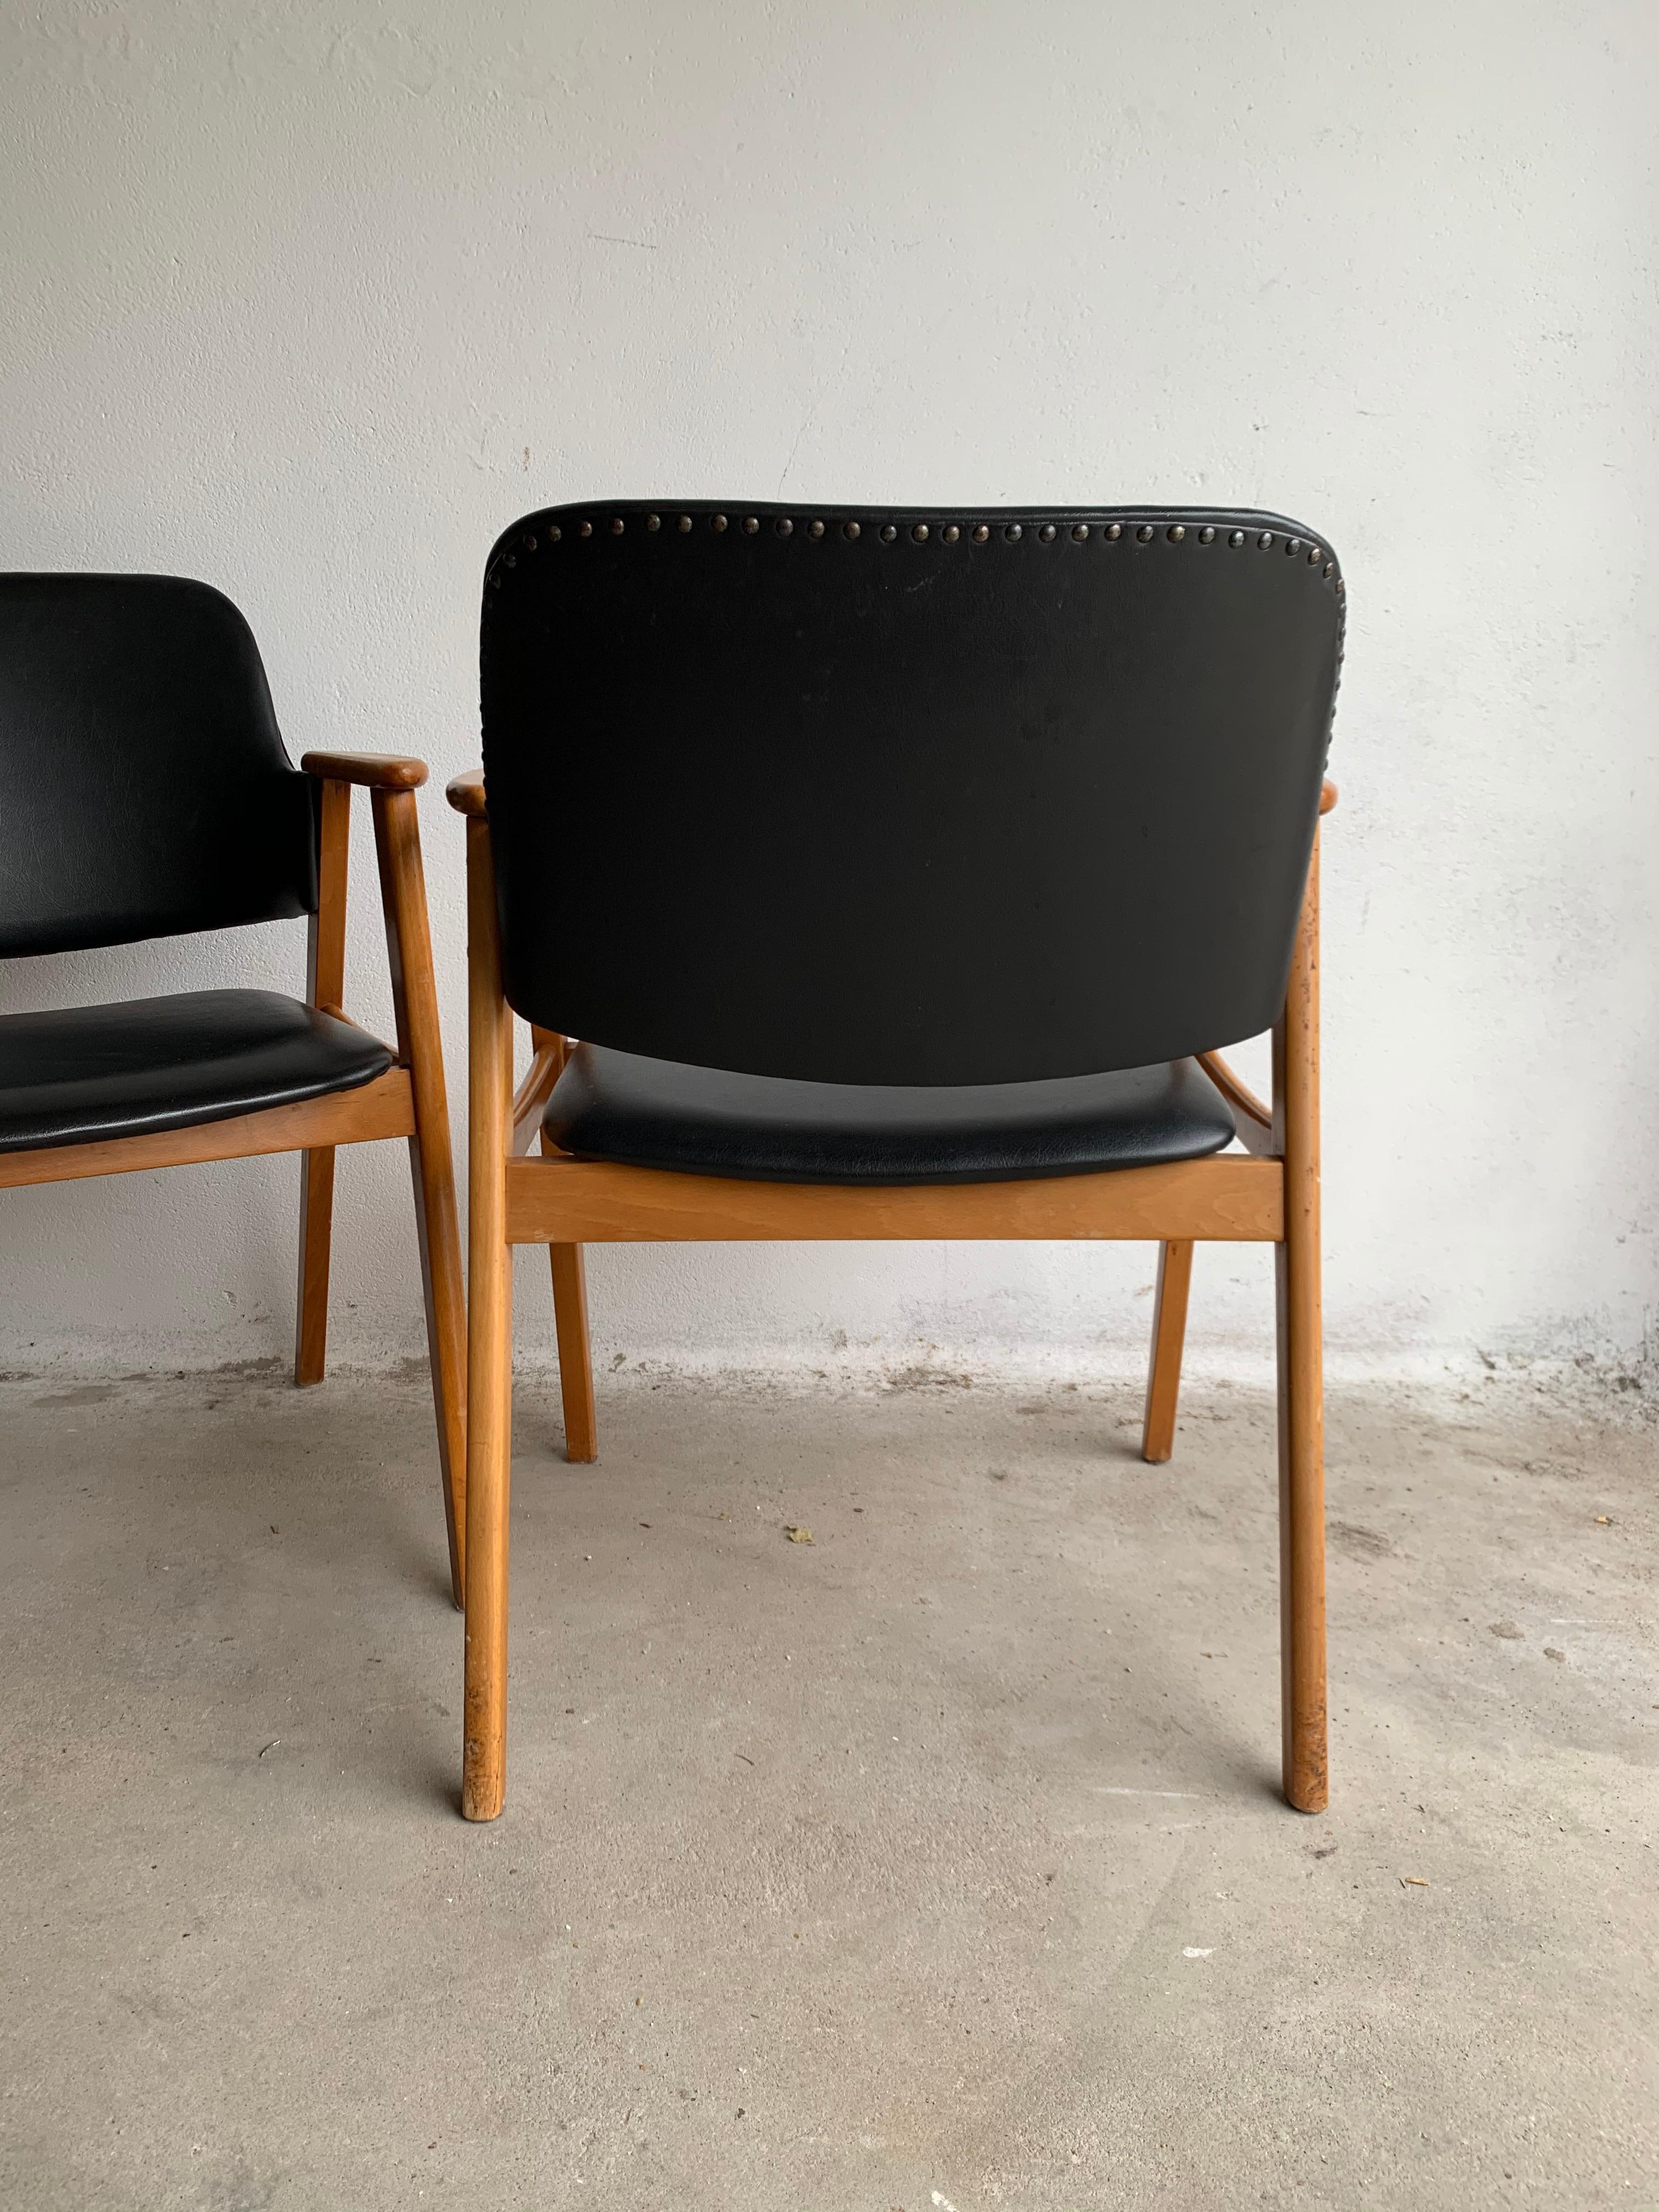 Mid-20th Century 20th Century Black Birch Dining Chairs by Cees Braakman for Pastoe, 1950s